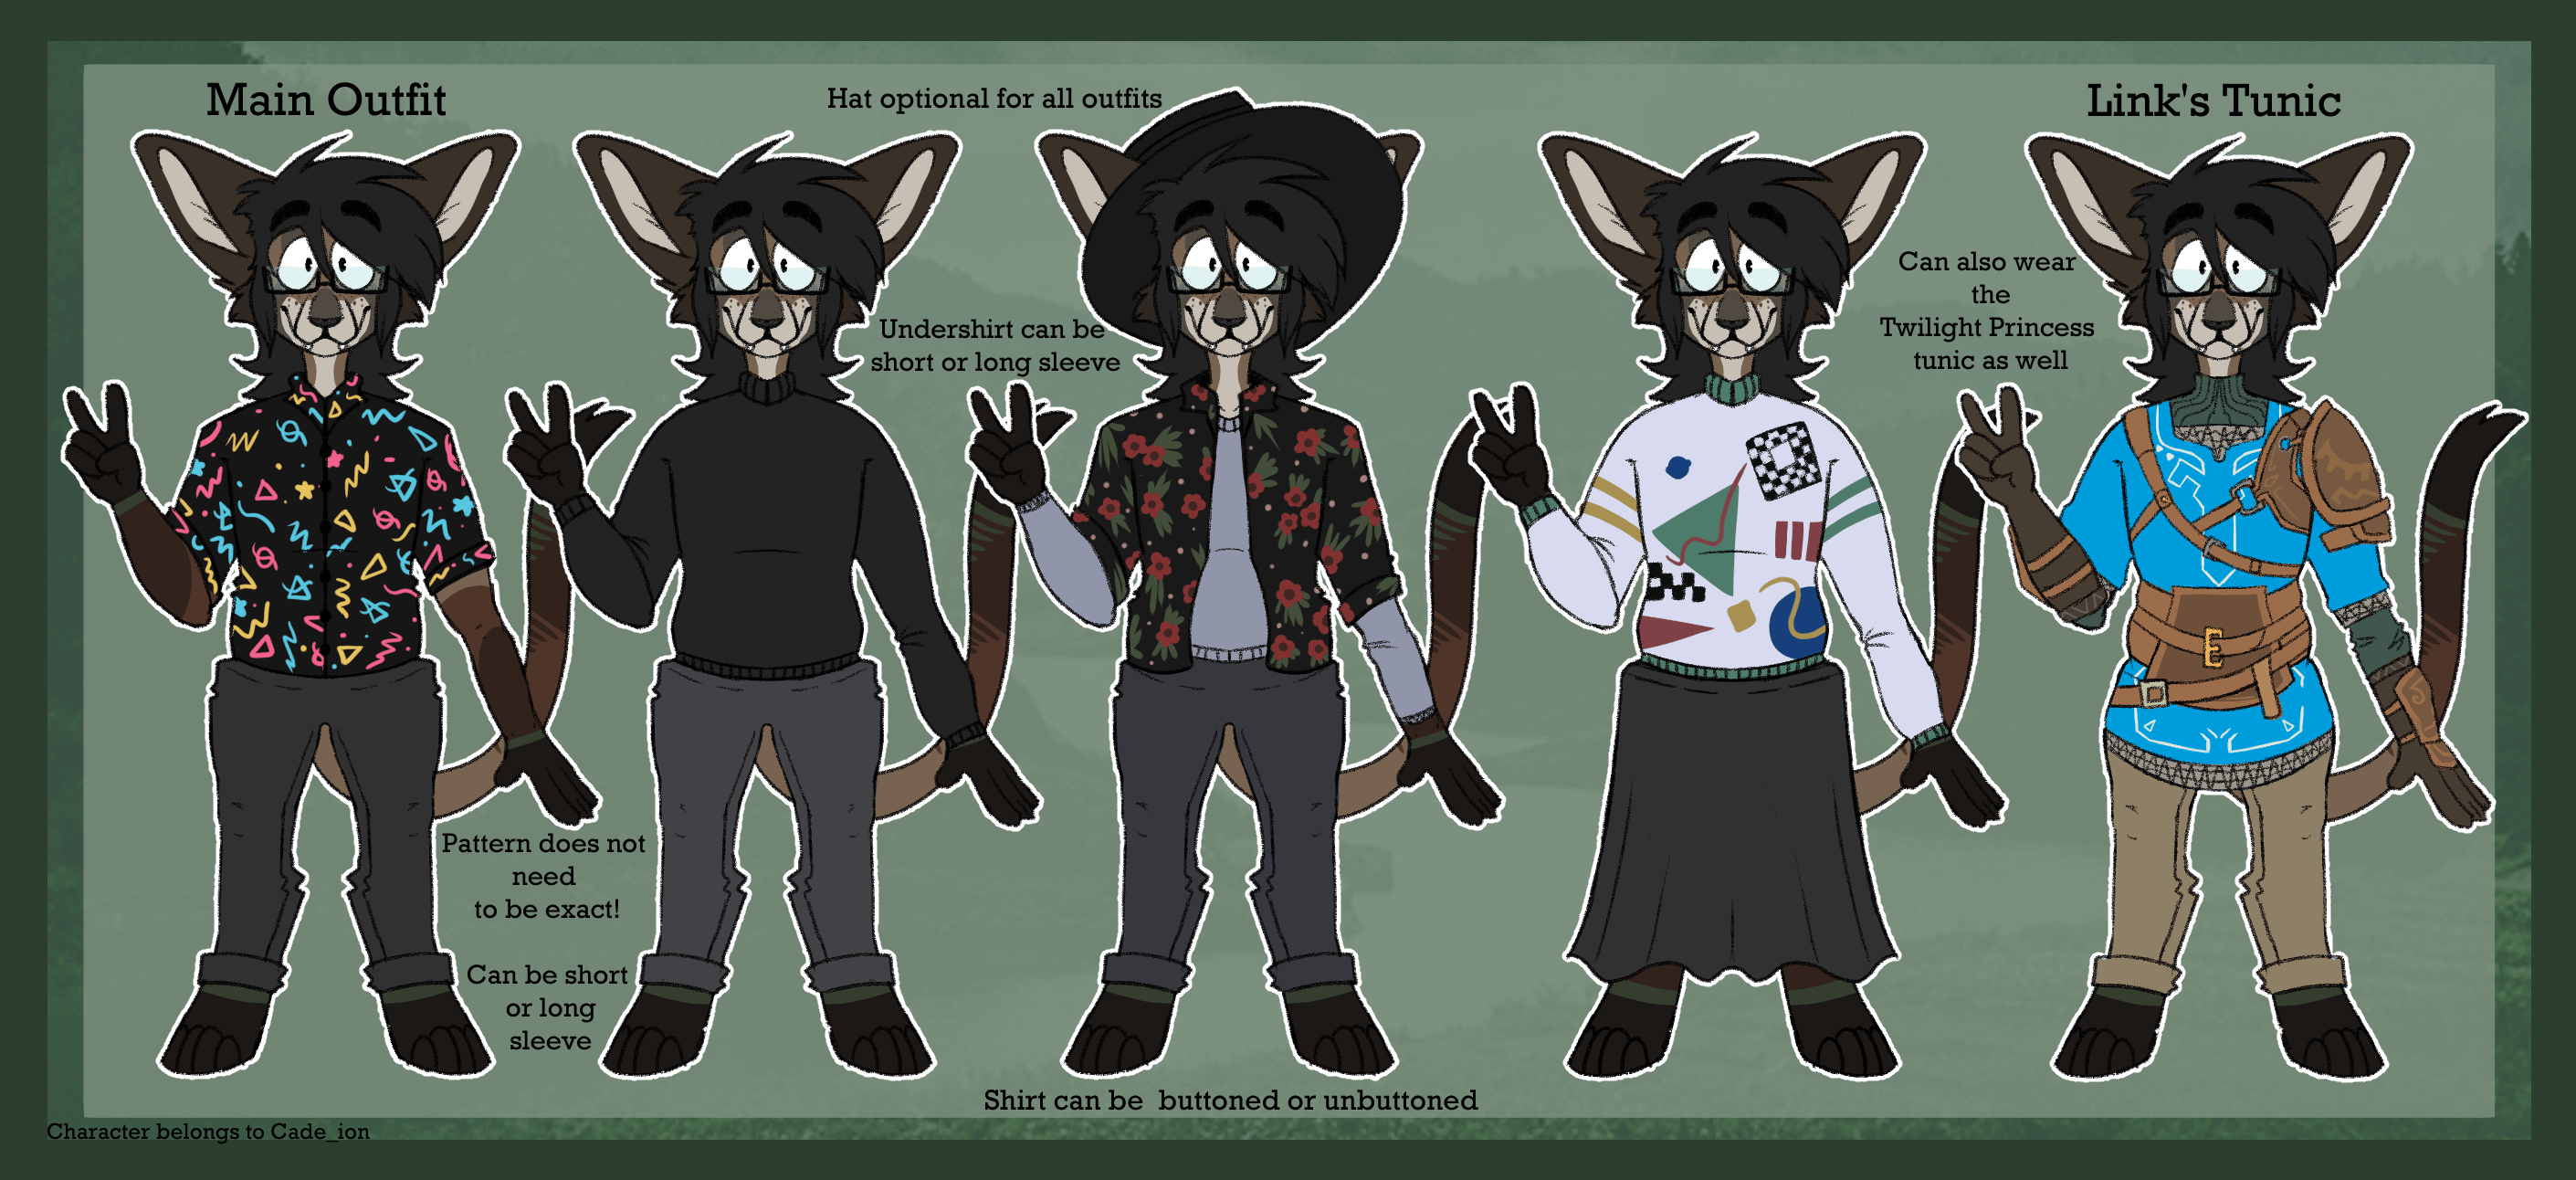 a reference sheet of an anthropomorphic cat a reference sheet of an anthropomorphic natural colored cat with long black hair in several outfits including a patterned button up, dark grey sweater, white retro sweater with grey skirt, floral print button up with widebrimmed hat, and a blue and white tunic